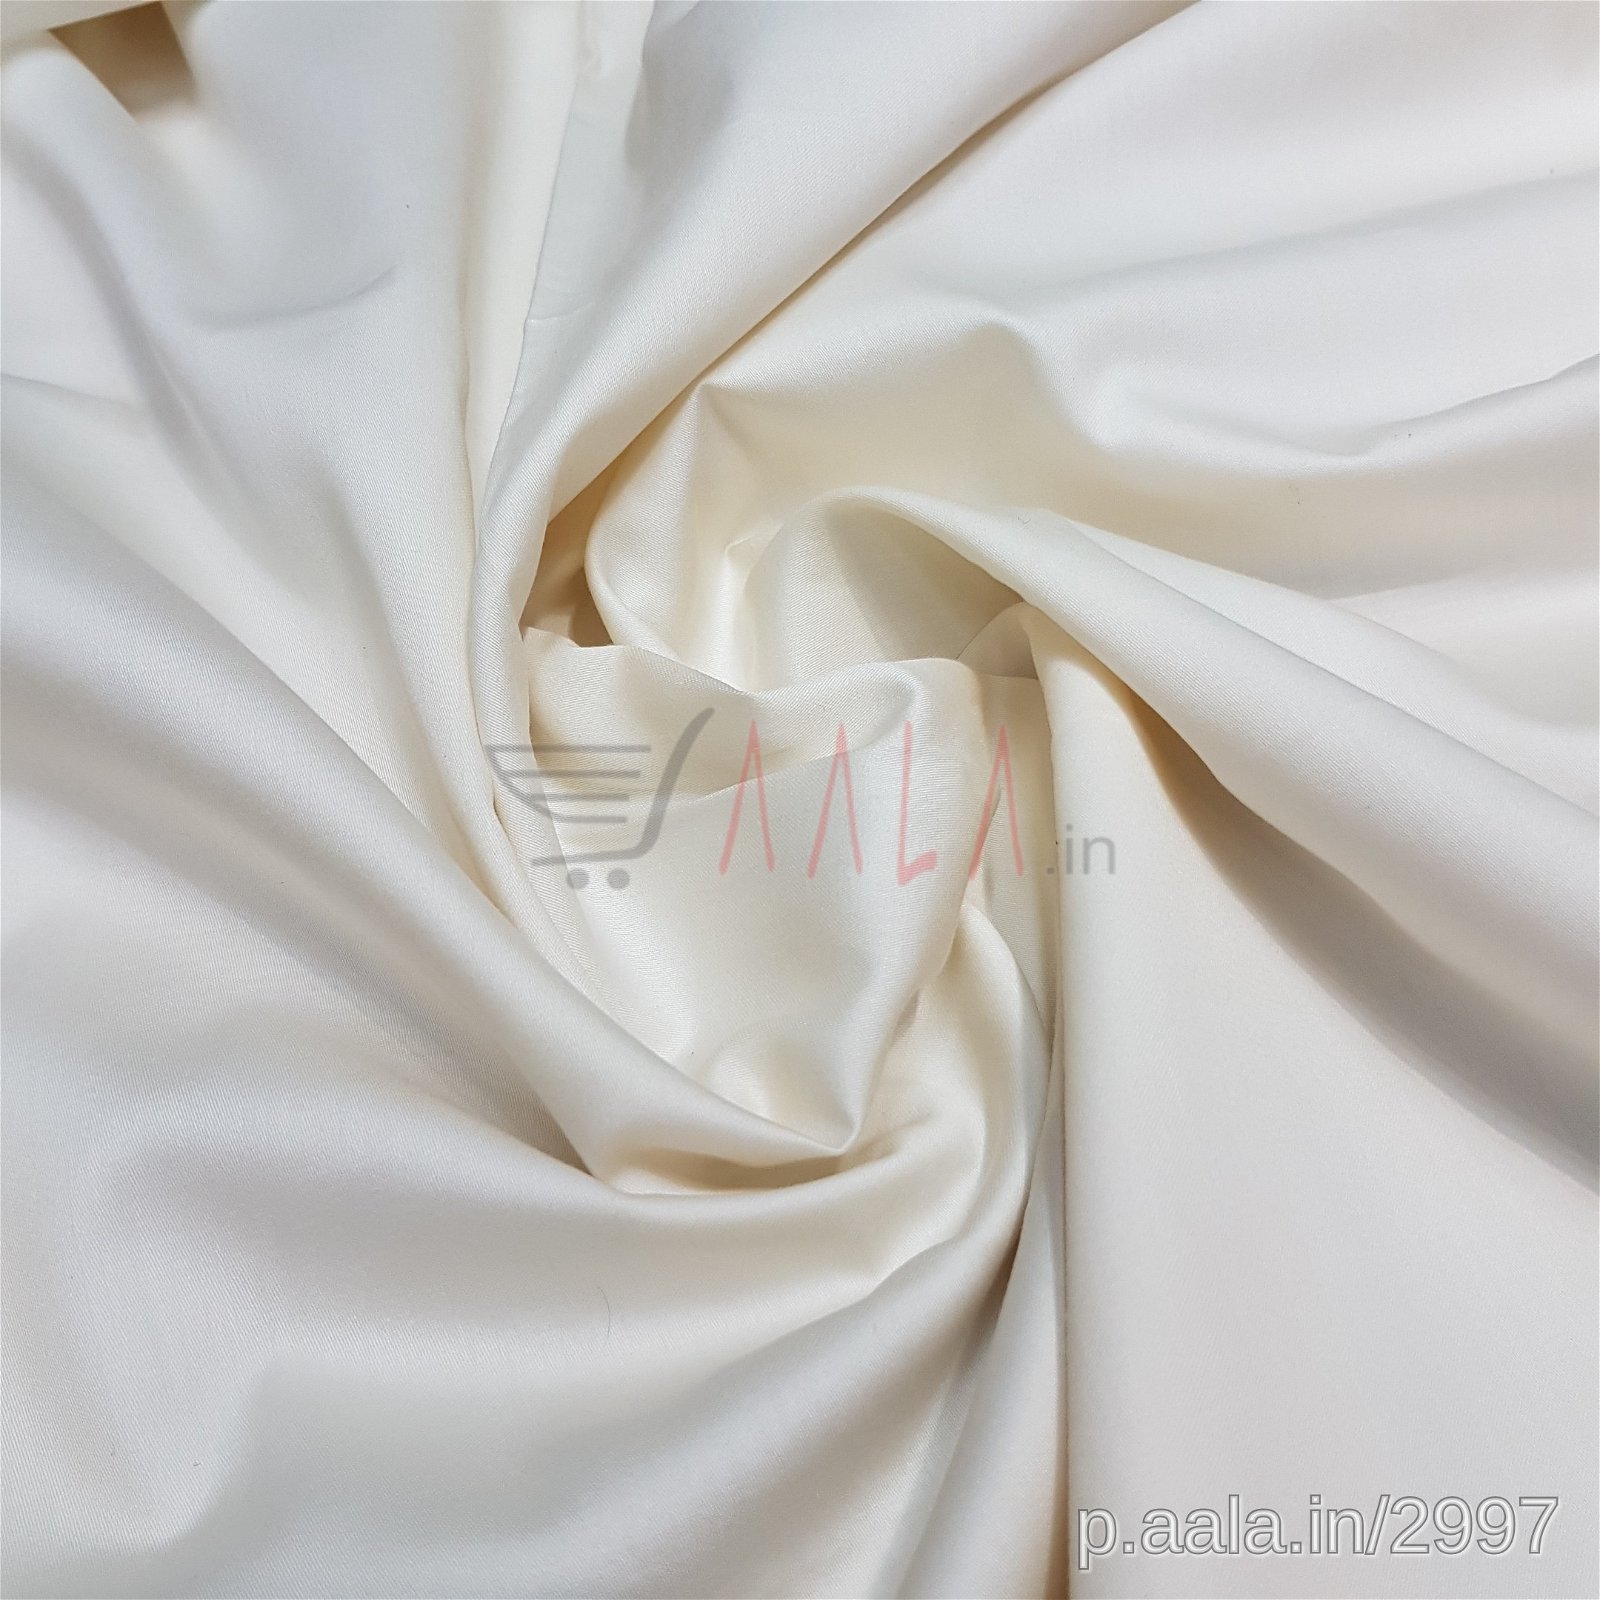 Satin Cotton 44 Inches Dyed Per Metre #2997